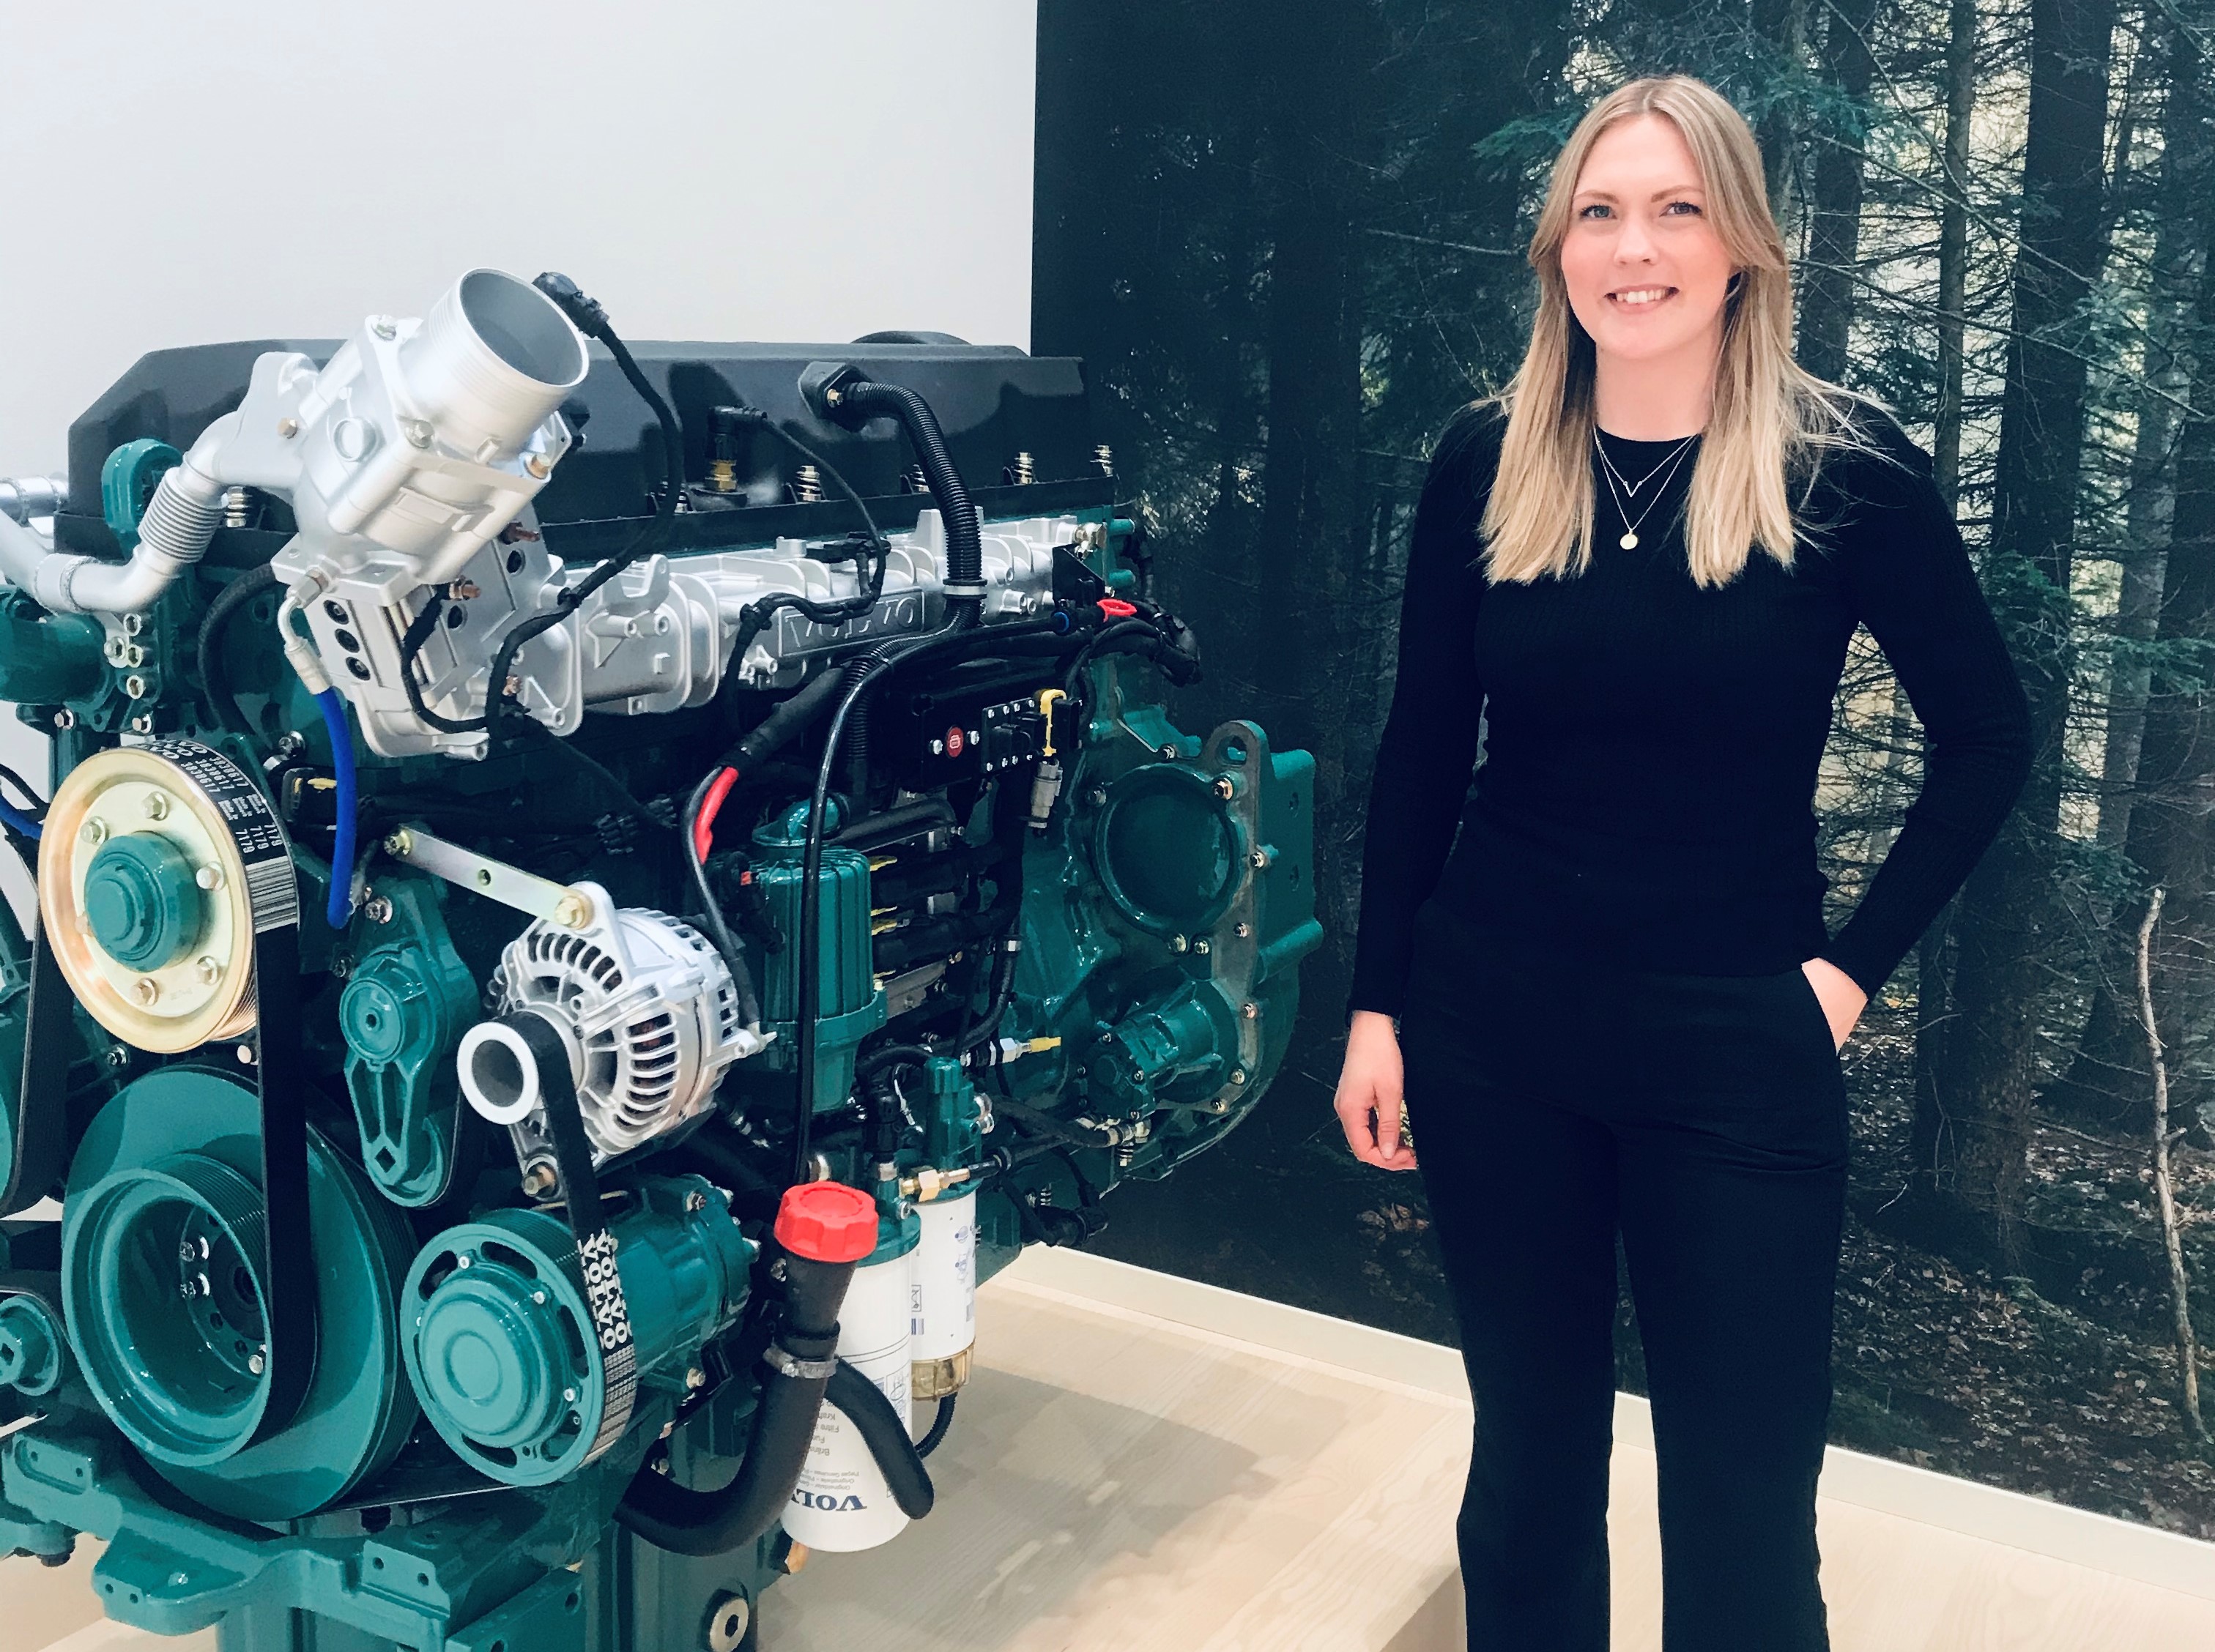 The former JTH student Victoria Andersson has worked in classiccally male-dominated technology areas developing chainsaws, trucks and electric vehicles.